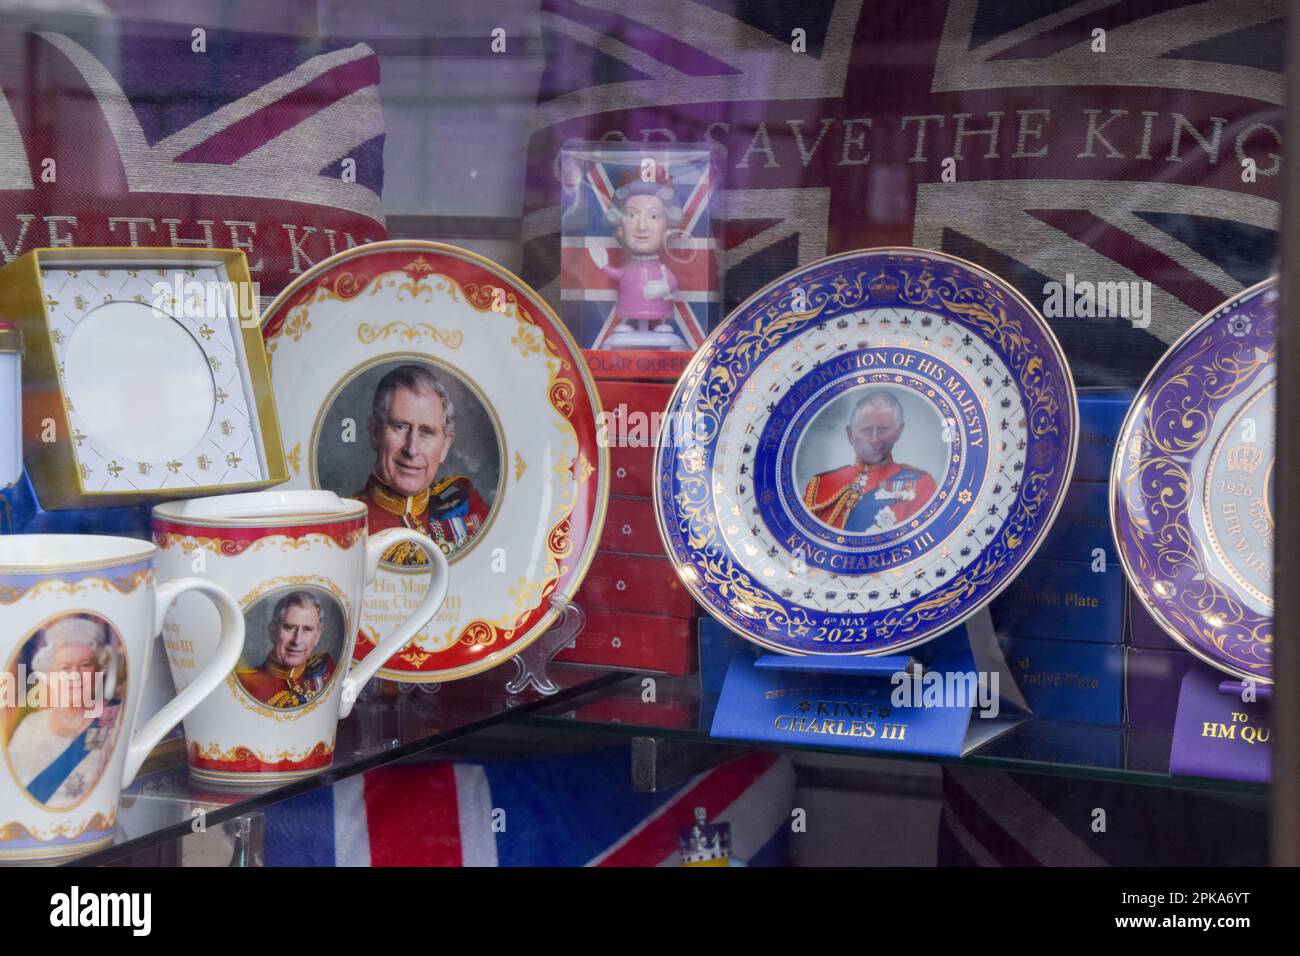 London, UK. 6th April 2023. Plates and souvenirs on sale in a shop in Central London as the preparations begin for the coronation of King Charles III, which takes place on May 6th. Stock Photo